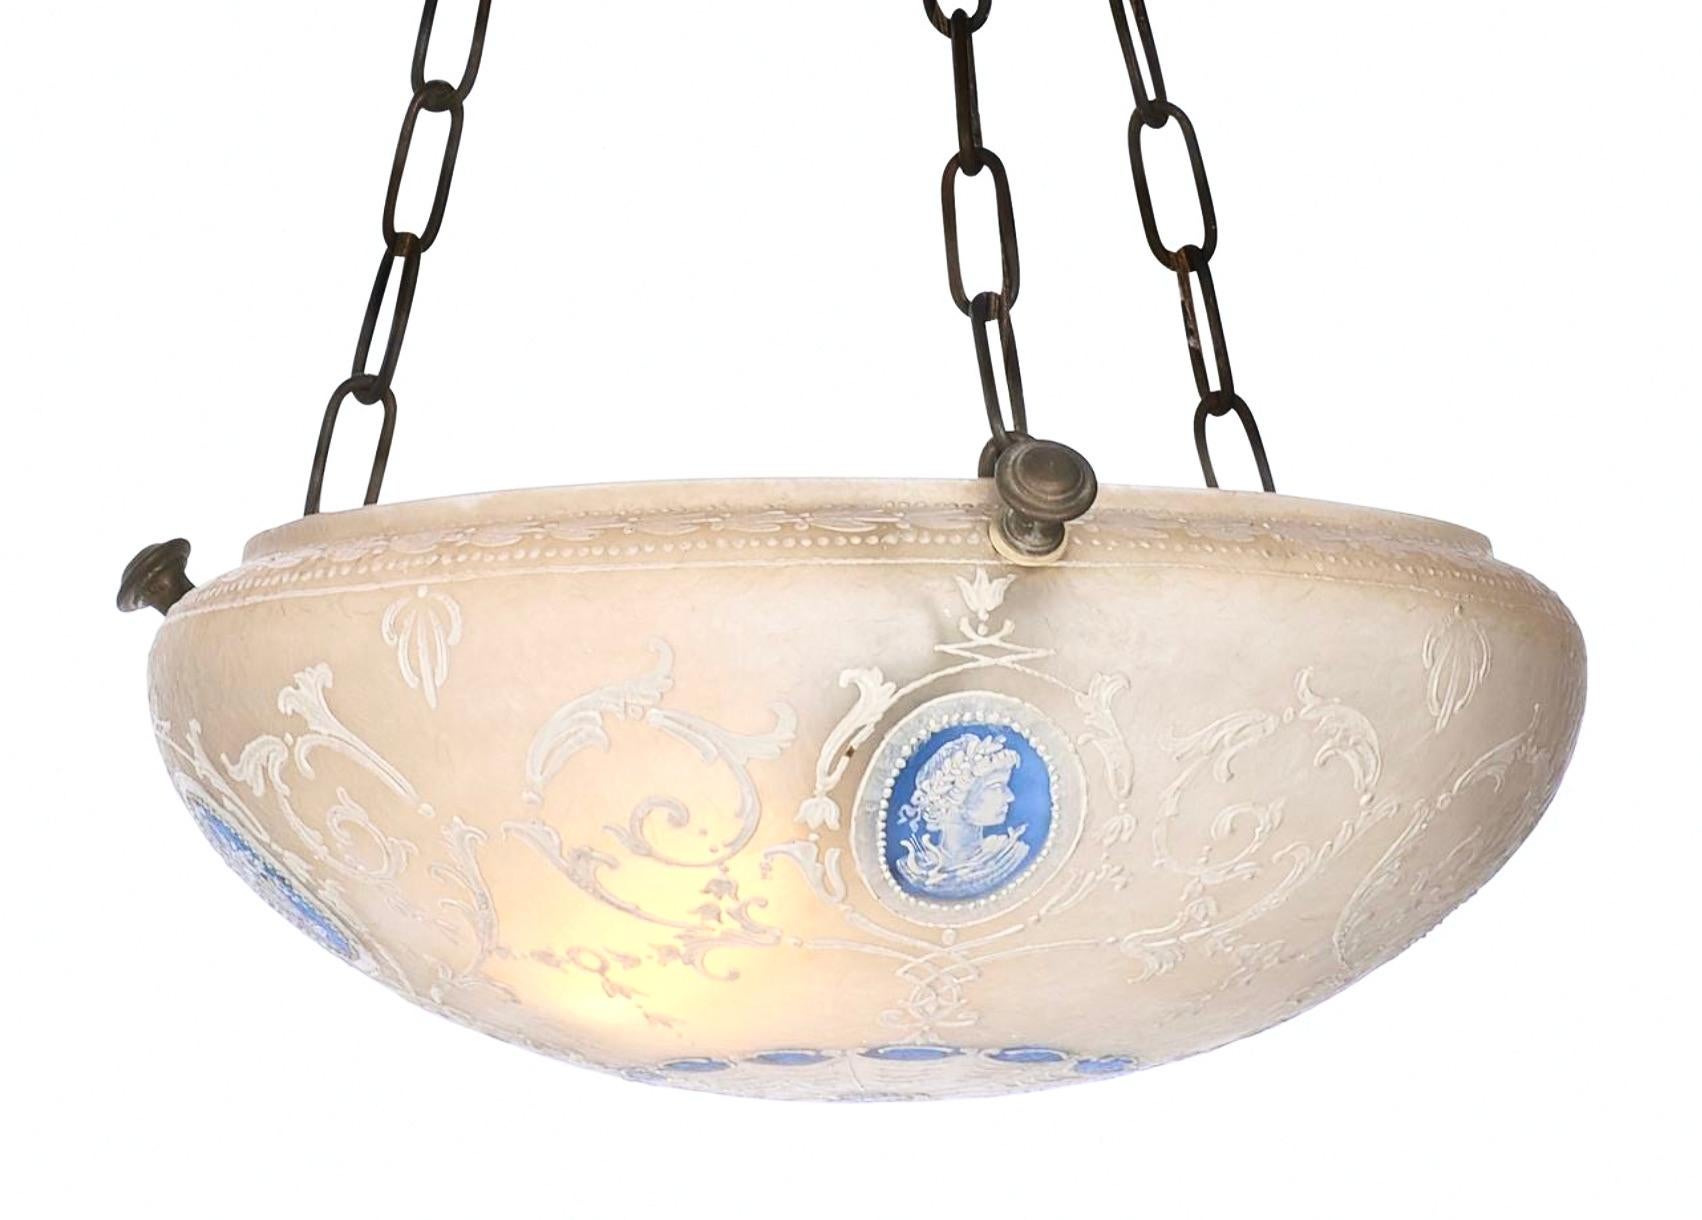 20th Century Pairpoint Vienna Hand-Painted Neo-Classical Wedgewood Blue Chandelier, 1920s For Sale